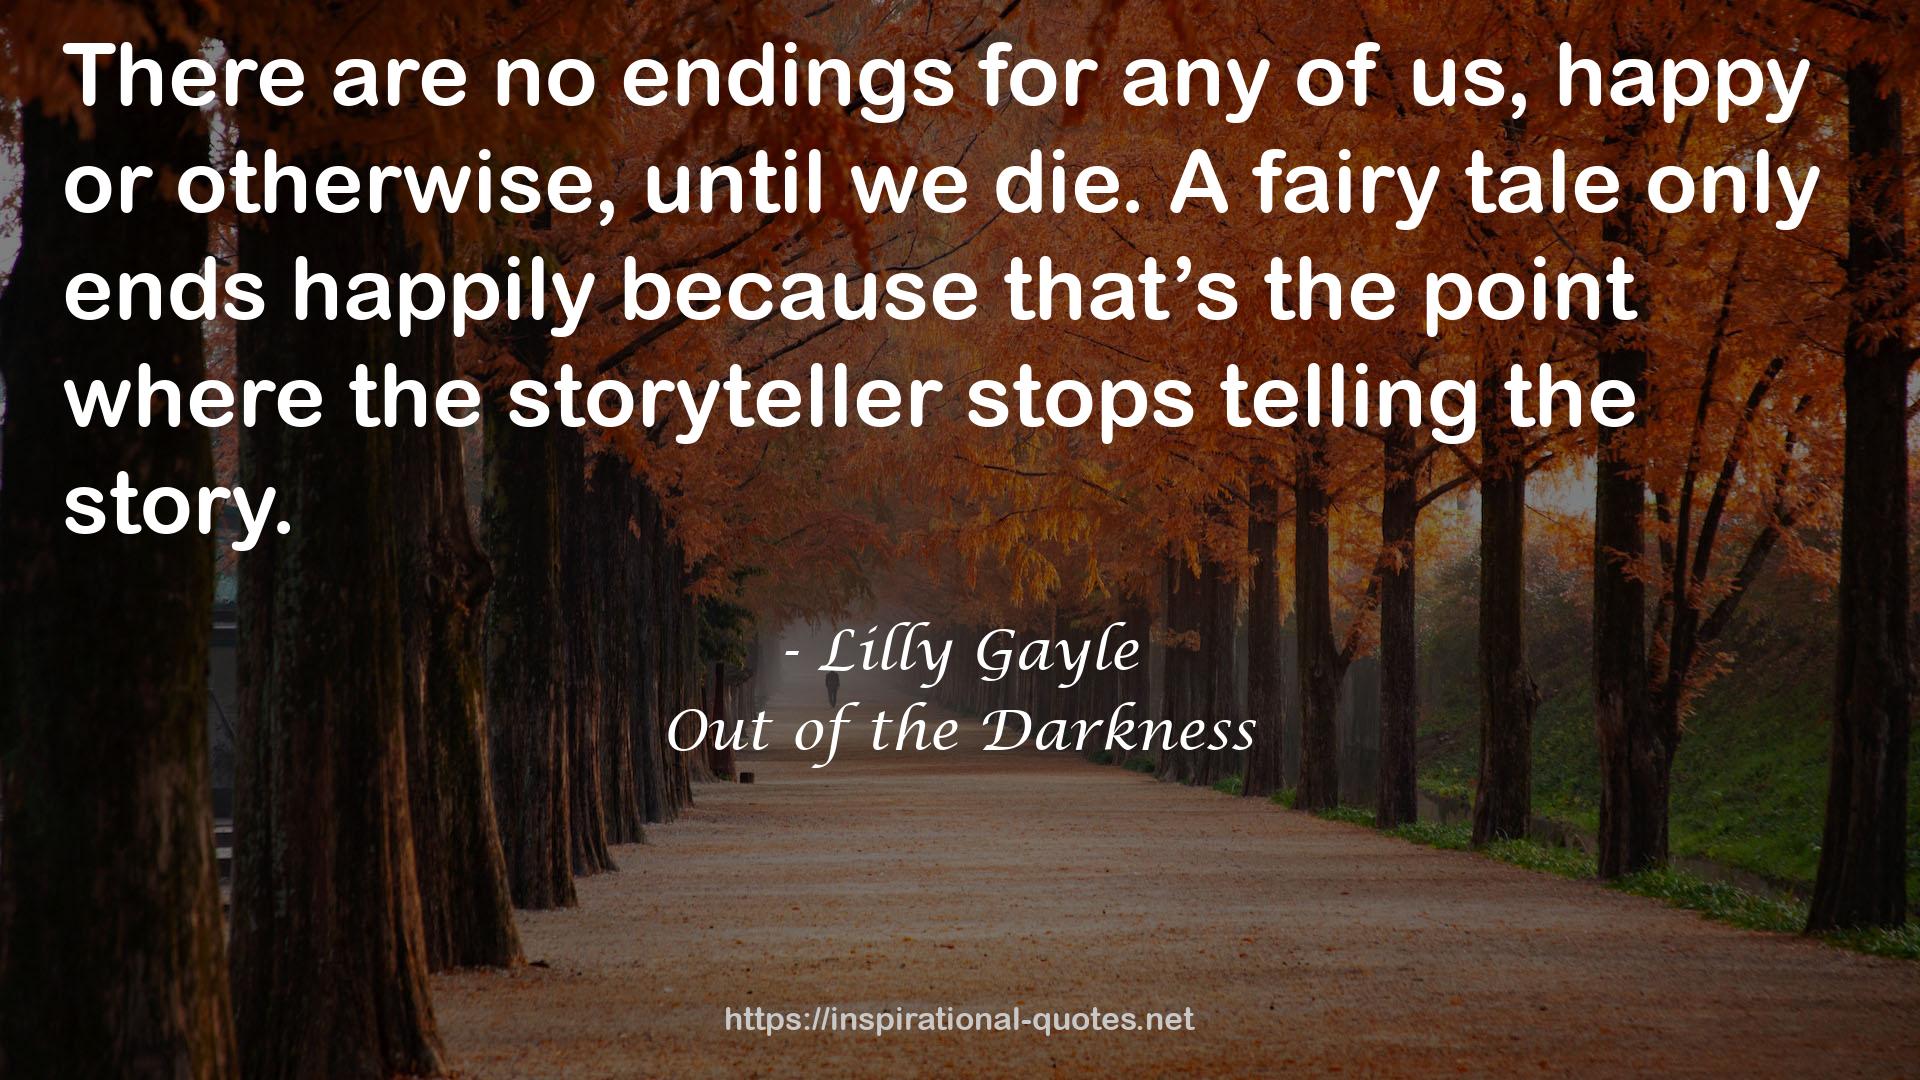 Lilly Gayle QUOTES